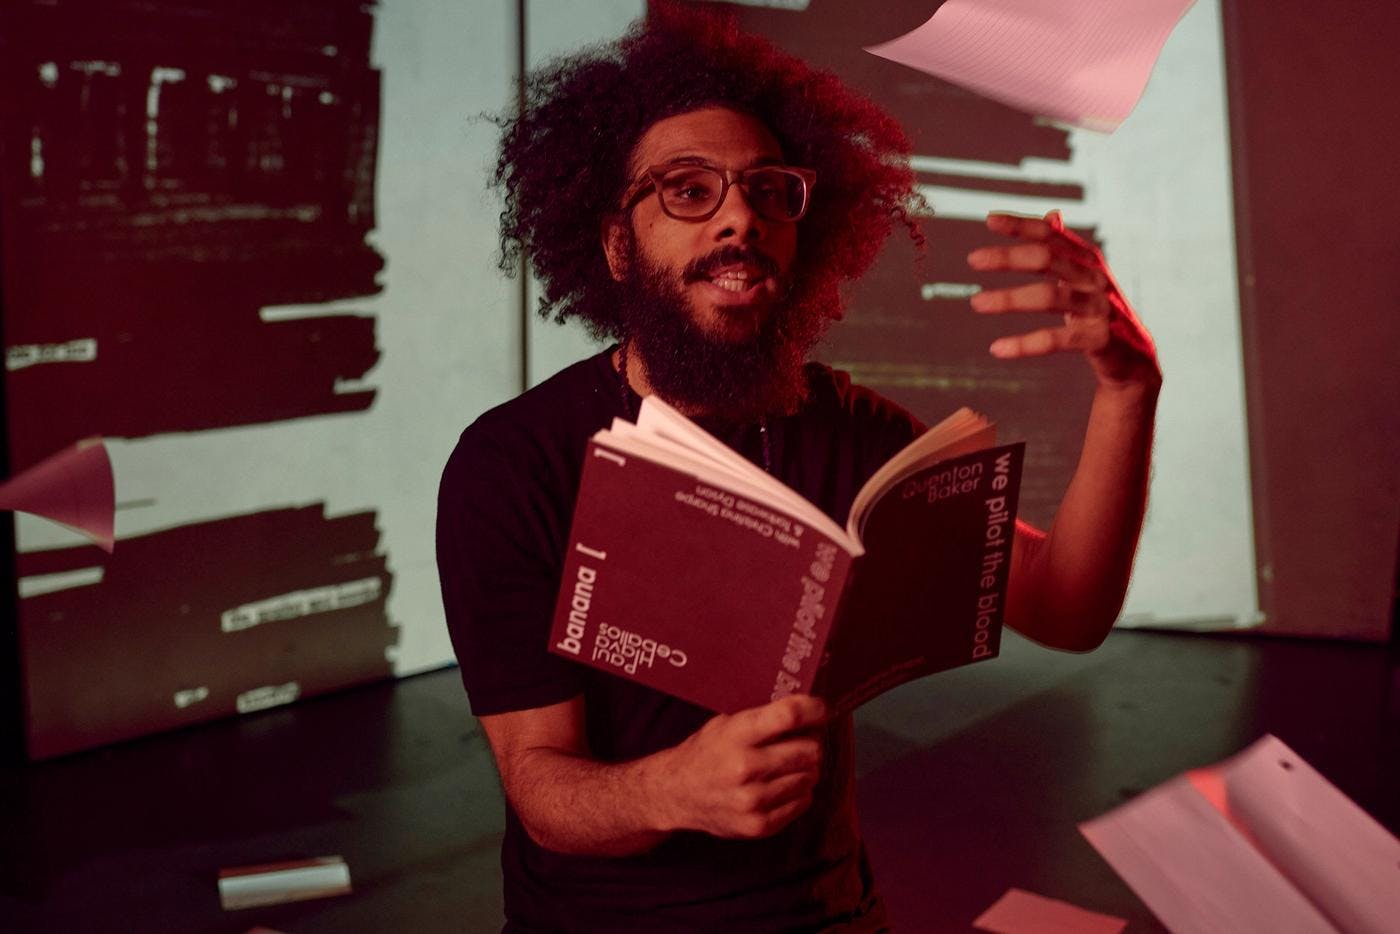 Quenton Baker reads from a book of poetry as sheets of notebook paper fall around him. A page from the book is projected on the a screen behind him.